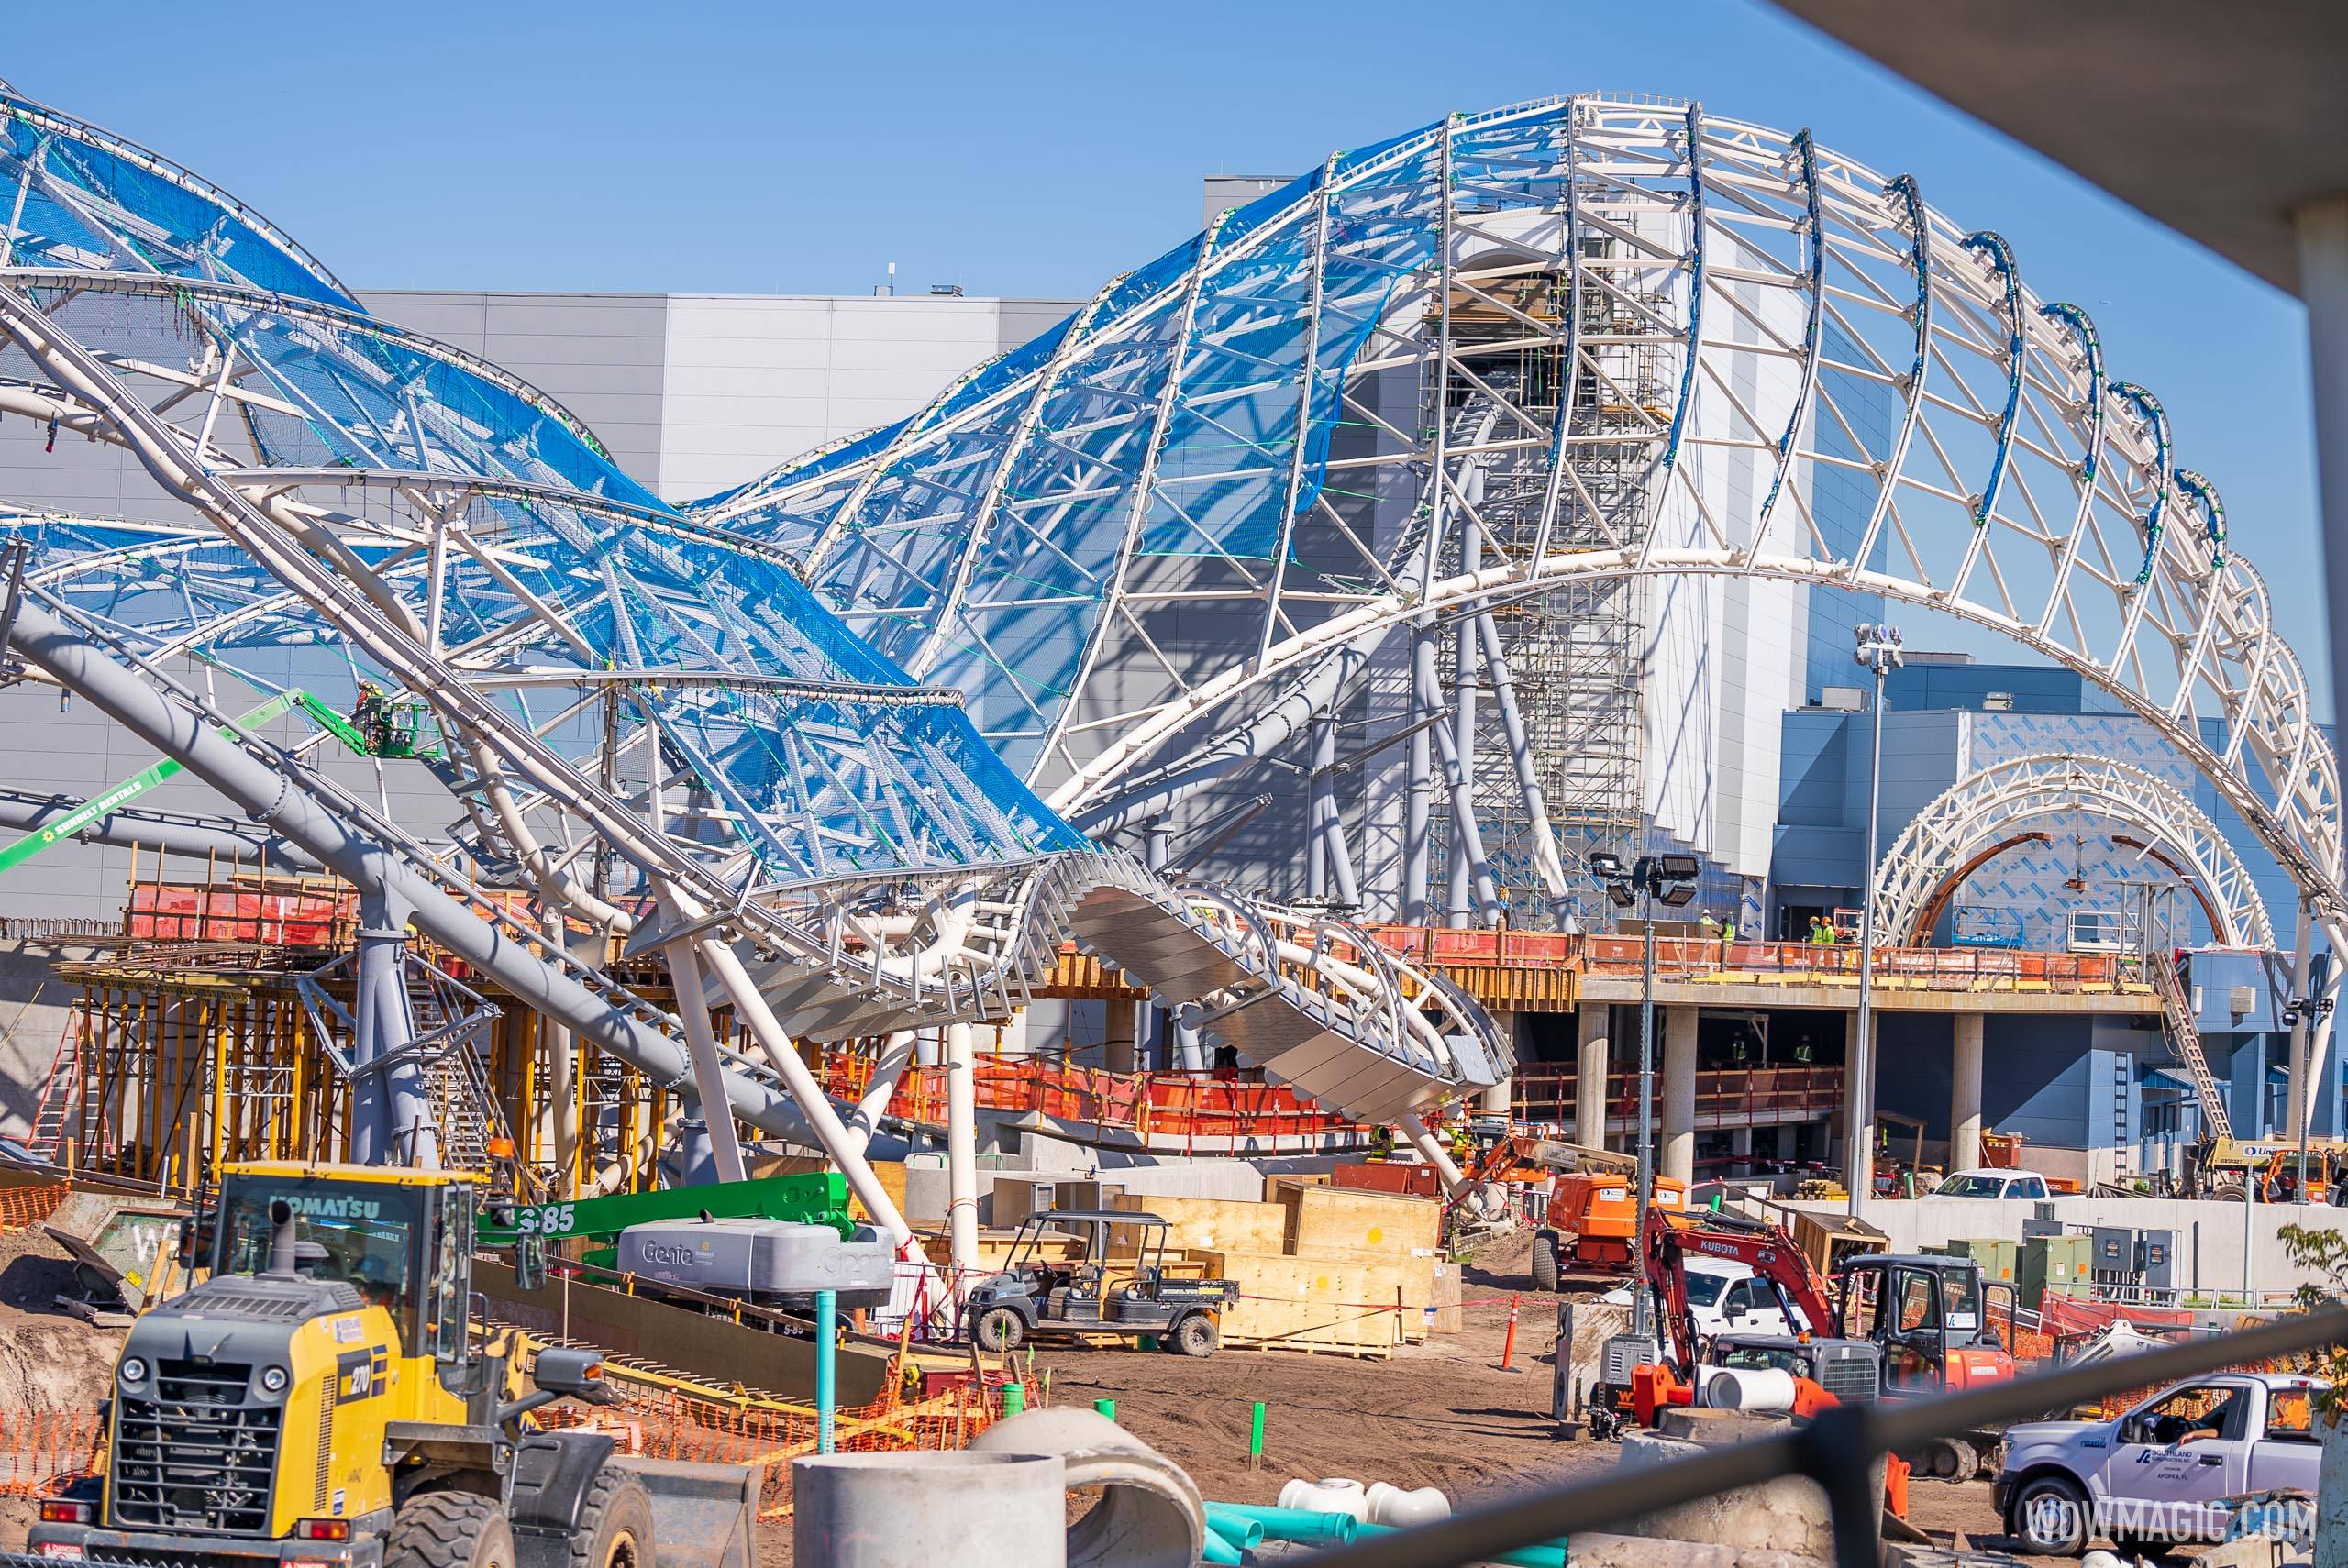 TRON Lightcycle Run construction update from Magic Kingdom